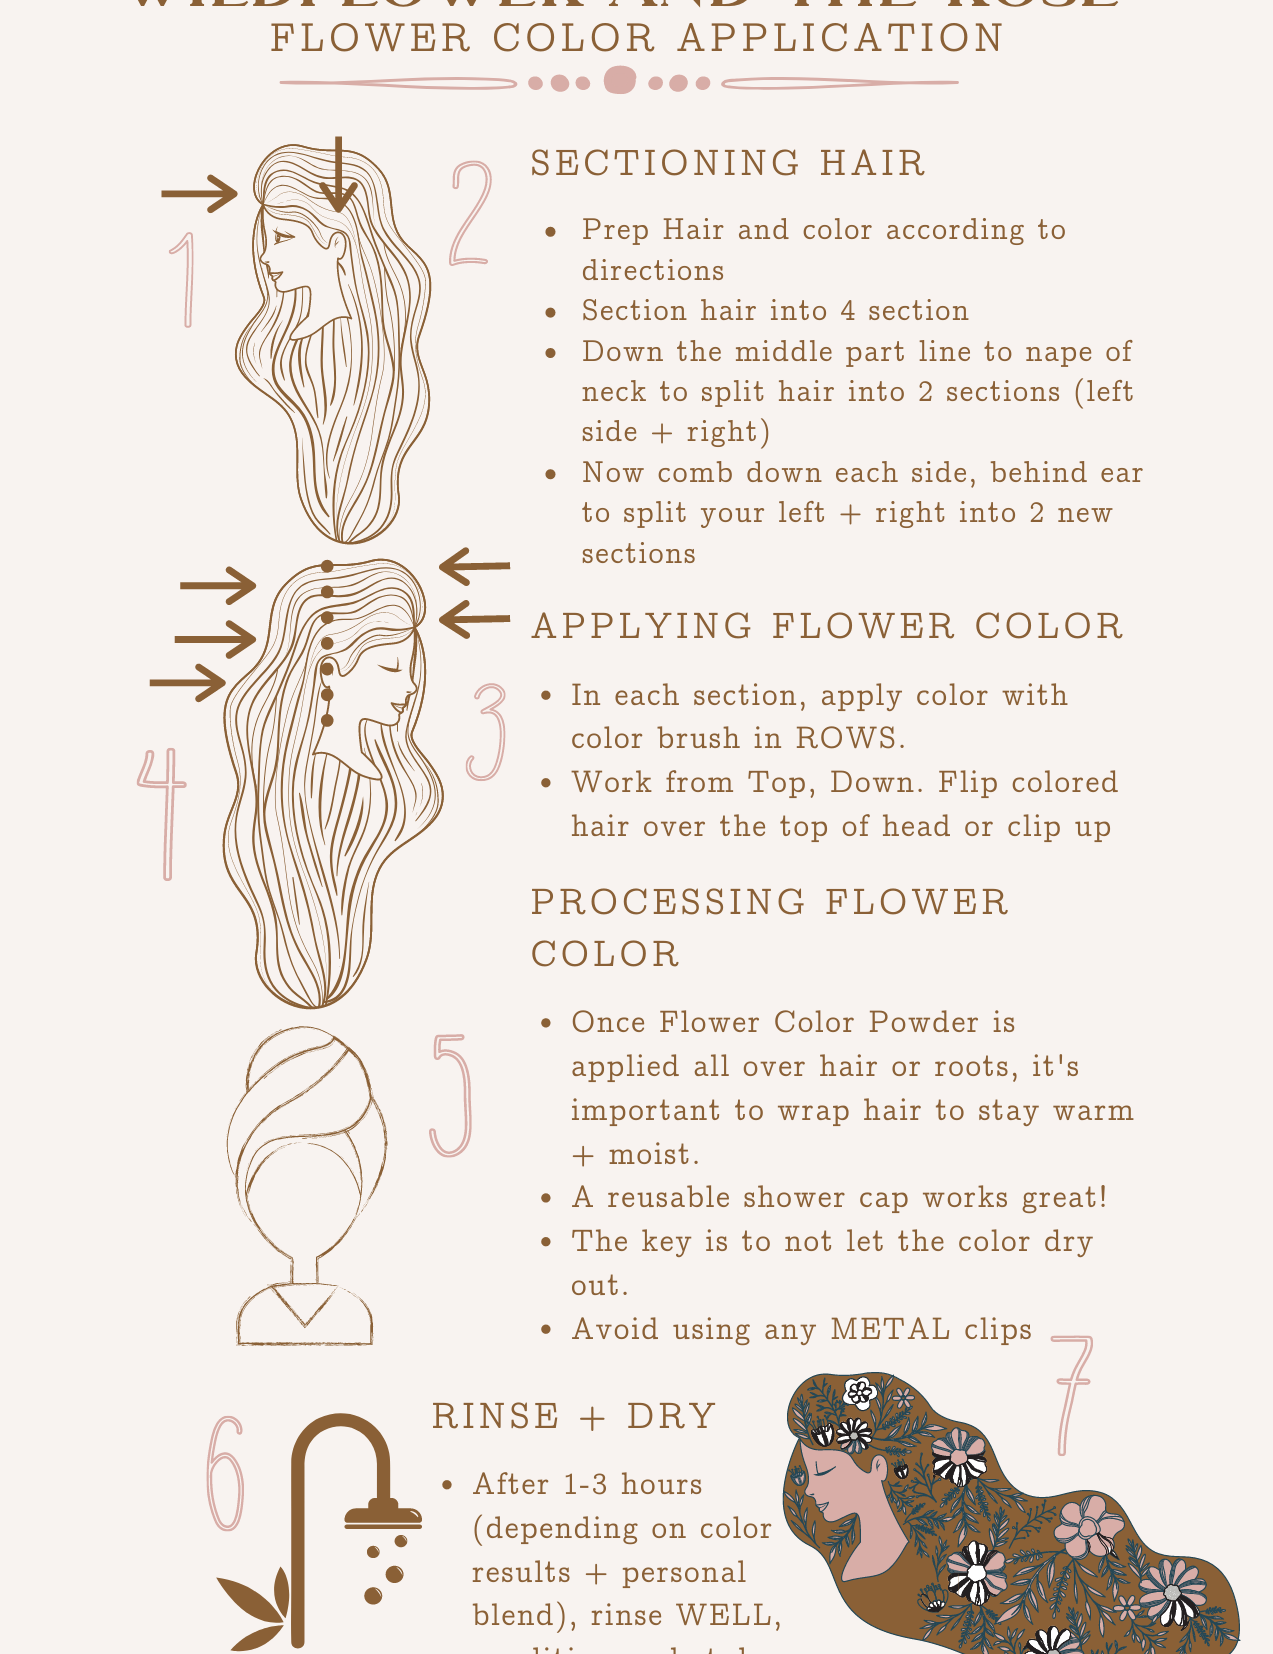 Application of Flower Hair Color Powder